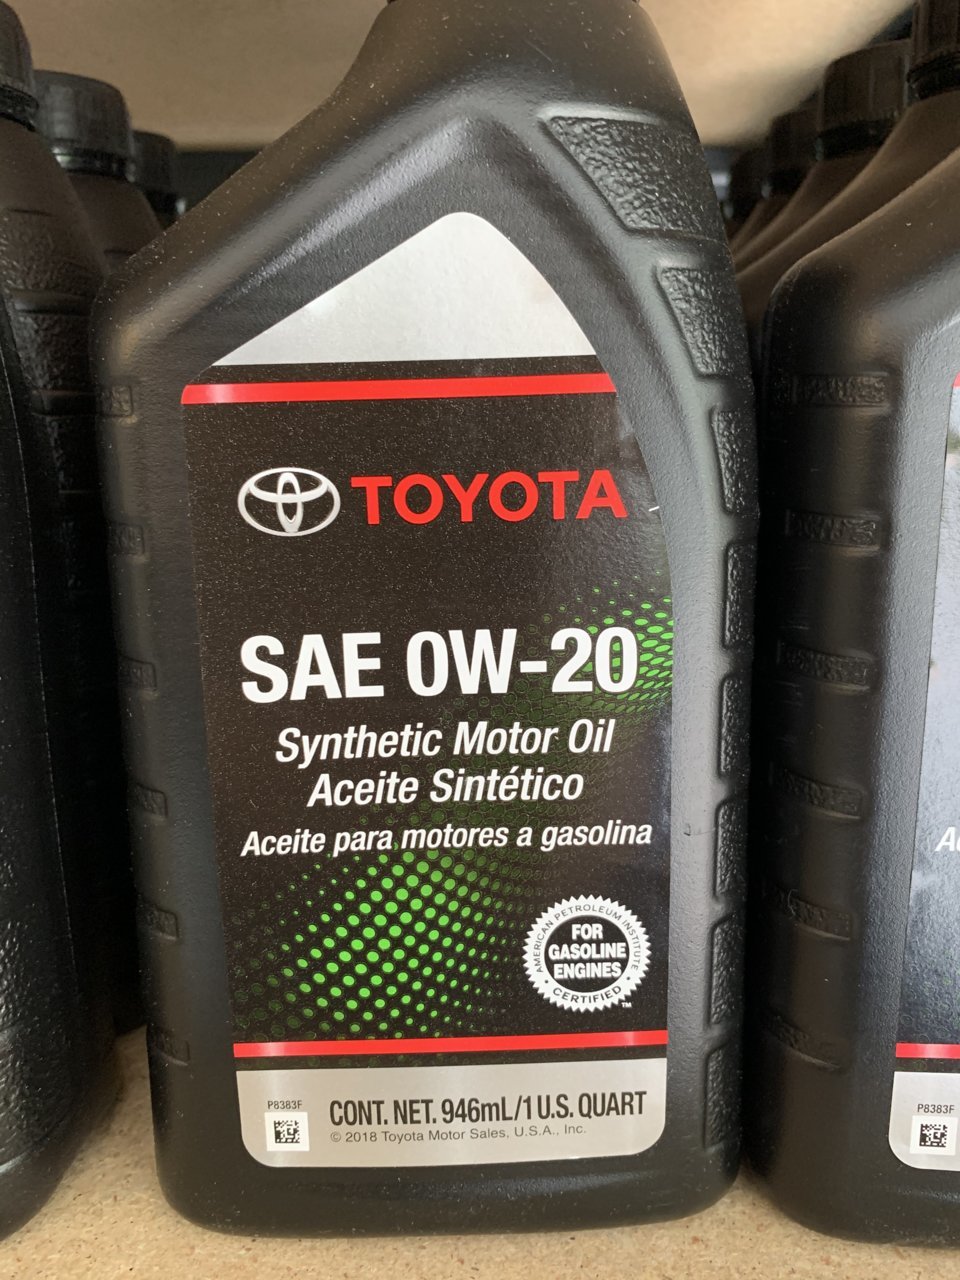 2020 Tundra oil changes | Toyota Tundra Forum